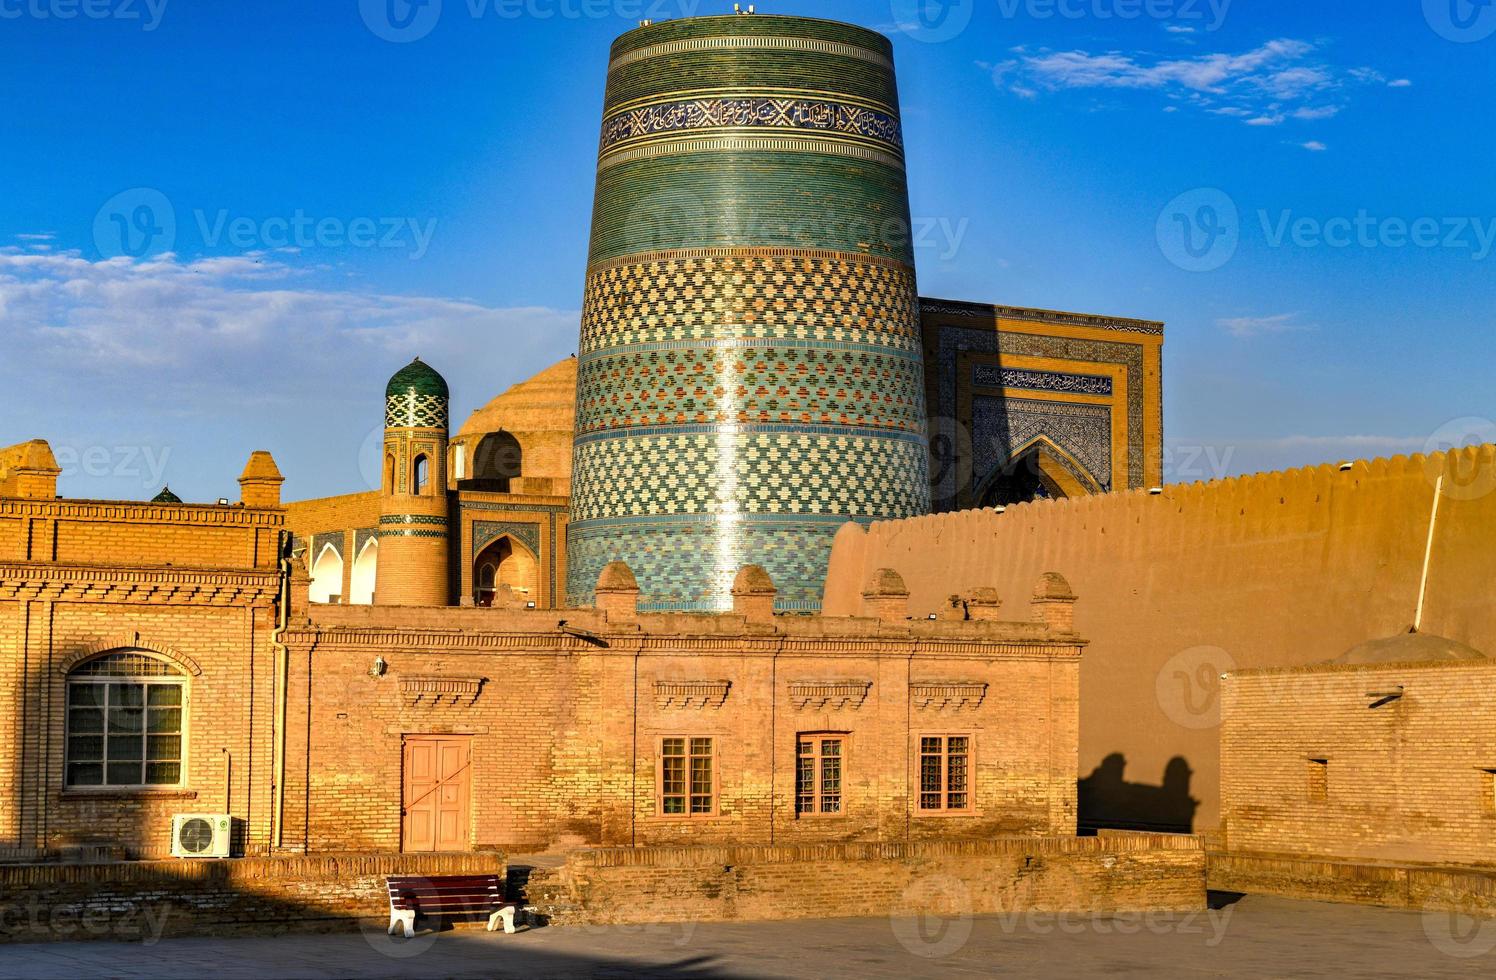 Kalta Minor Minaret and the historic architecture of Itchan Kala, walled inner town of the city of Khiva, Uzbekistan a UNESCO World Heritage Site. photo